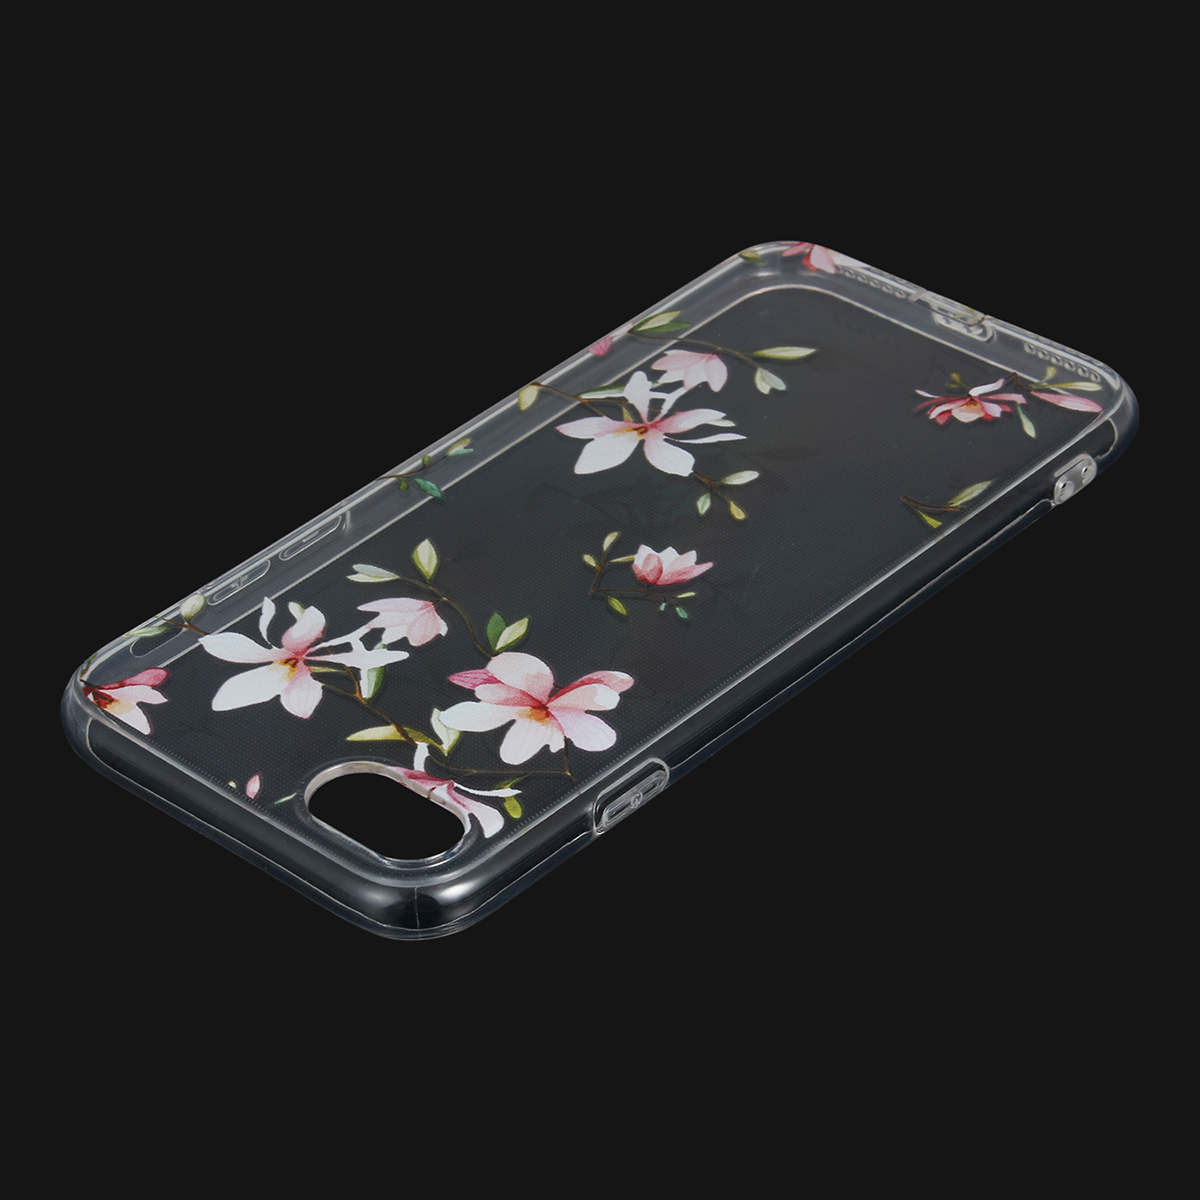 New Slim Soft TPU Transparent Printing Phone Case for iPhone 7 - Pink Flower